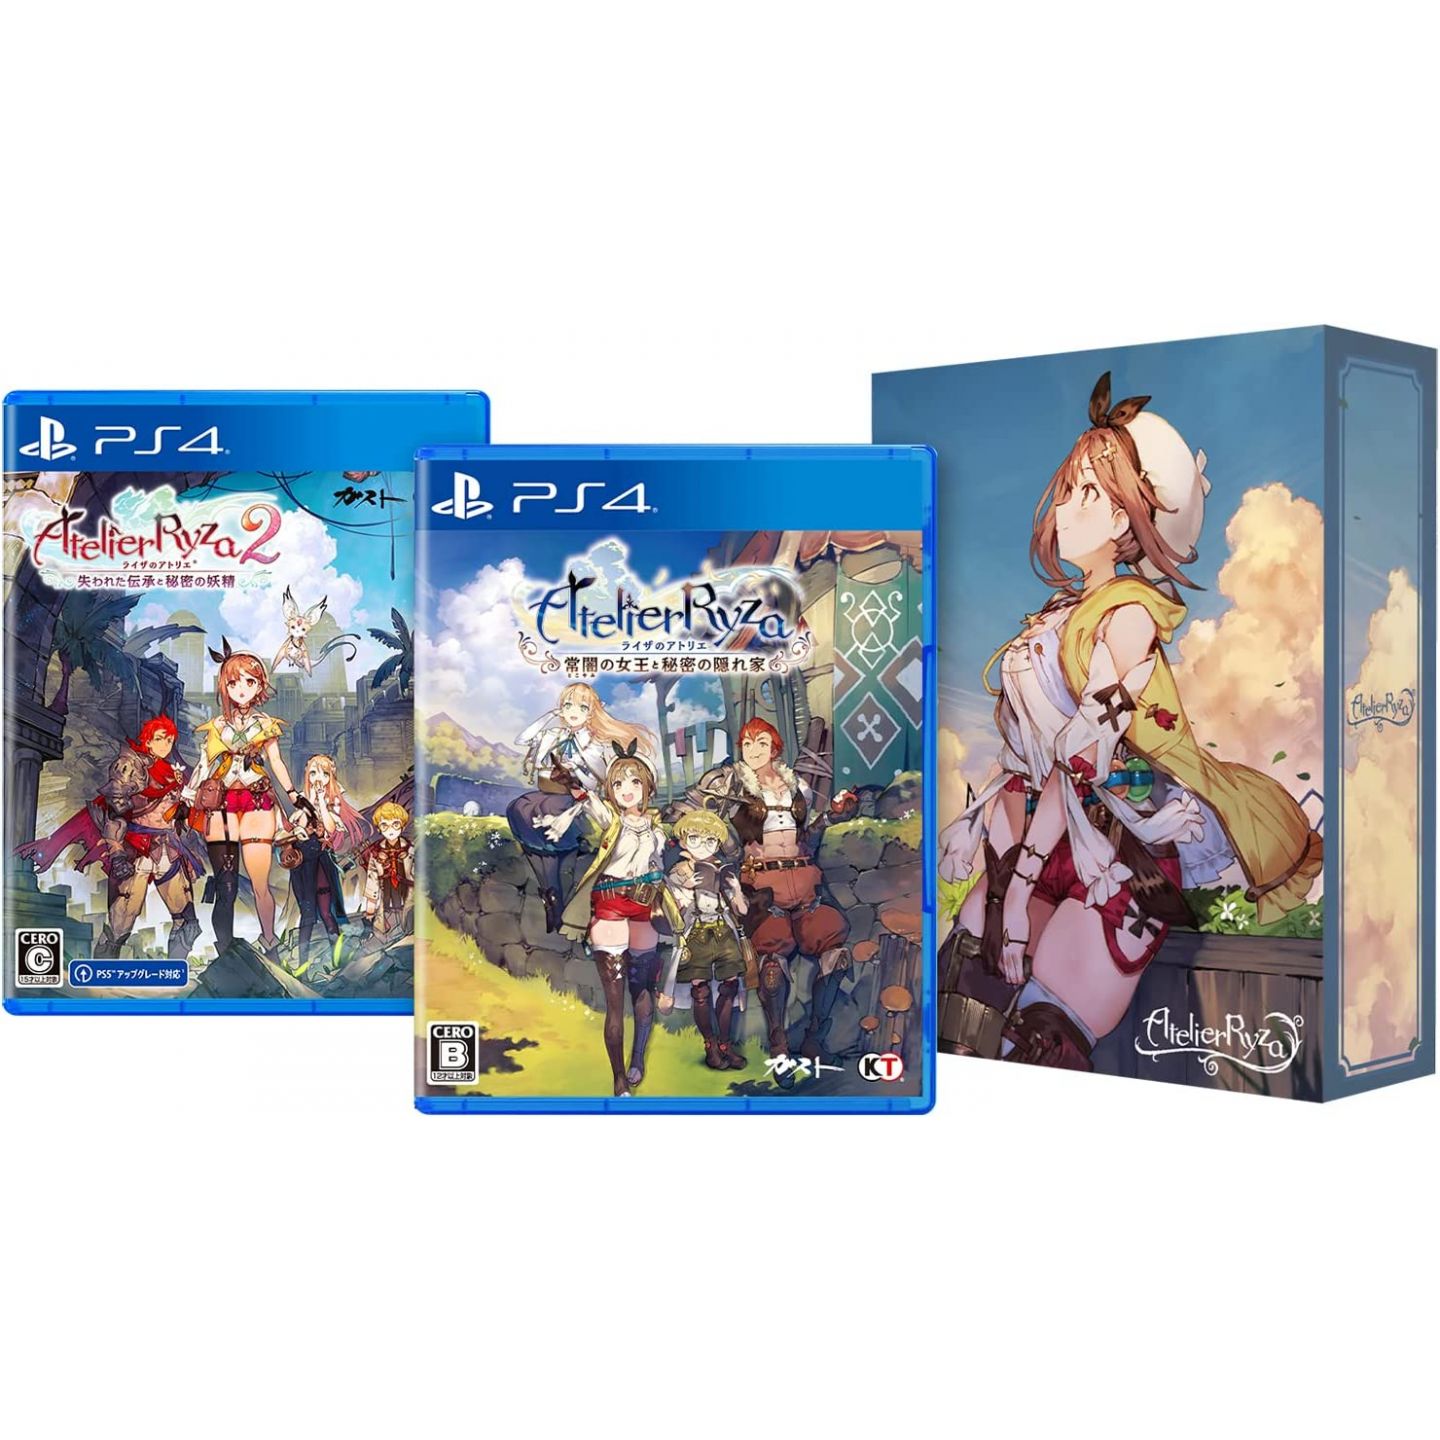 Koei Tecmo Atelier Ryza 1&2 Limited Pack for Sony PS4